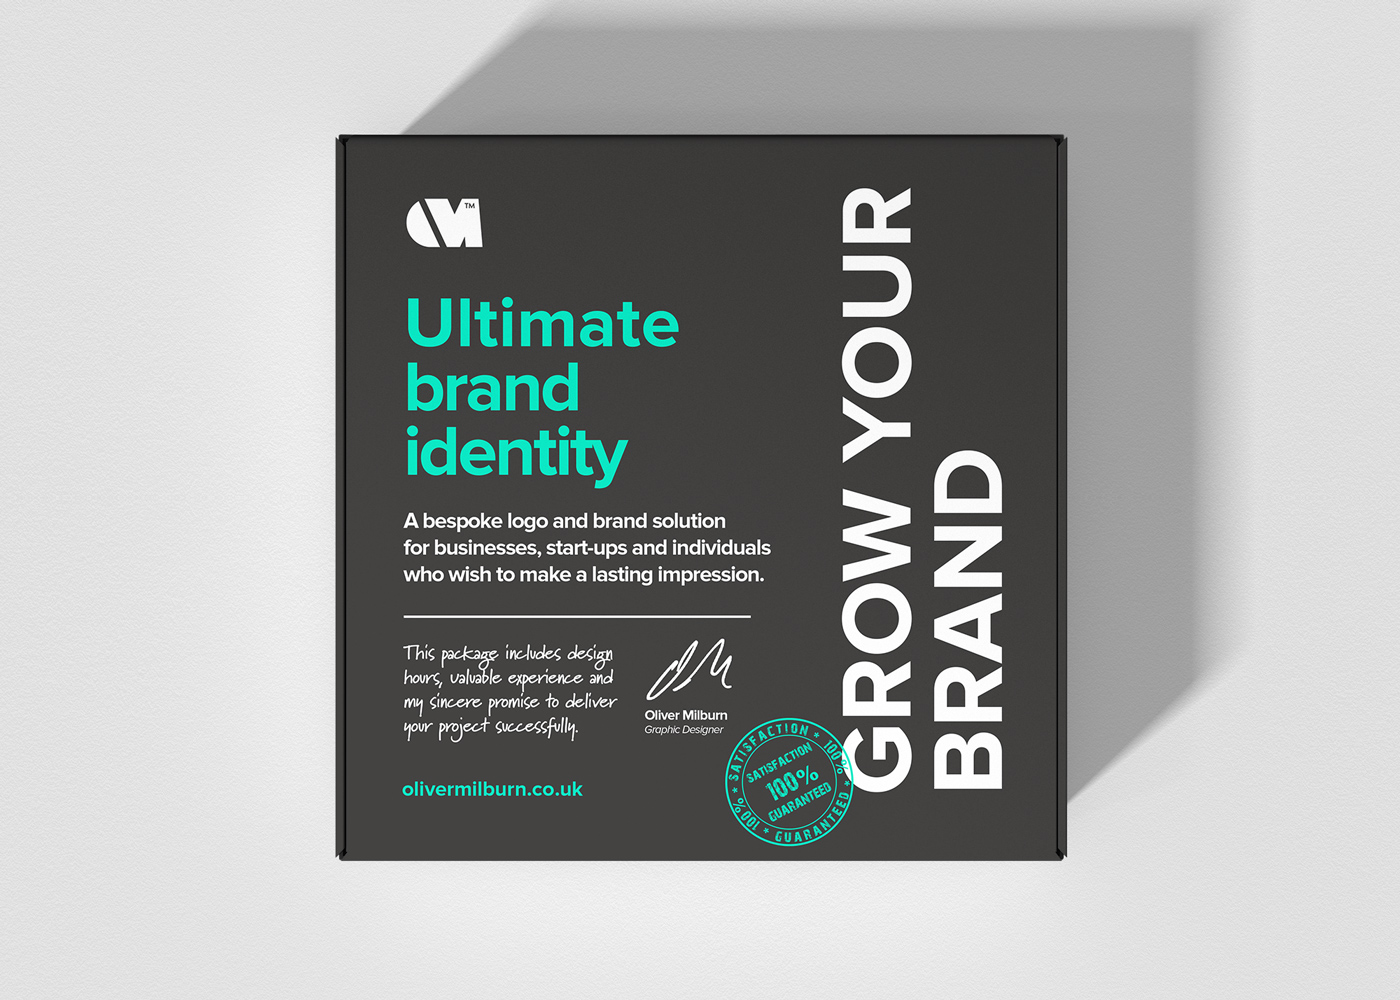 The ultimate Brand Identity presentation design package by Oliver Milburn